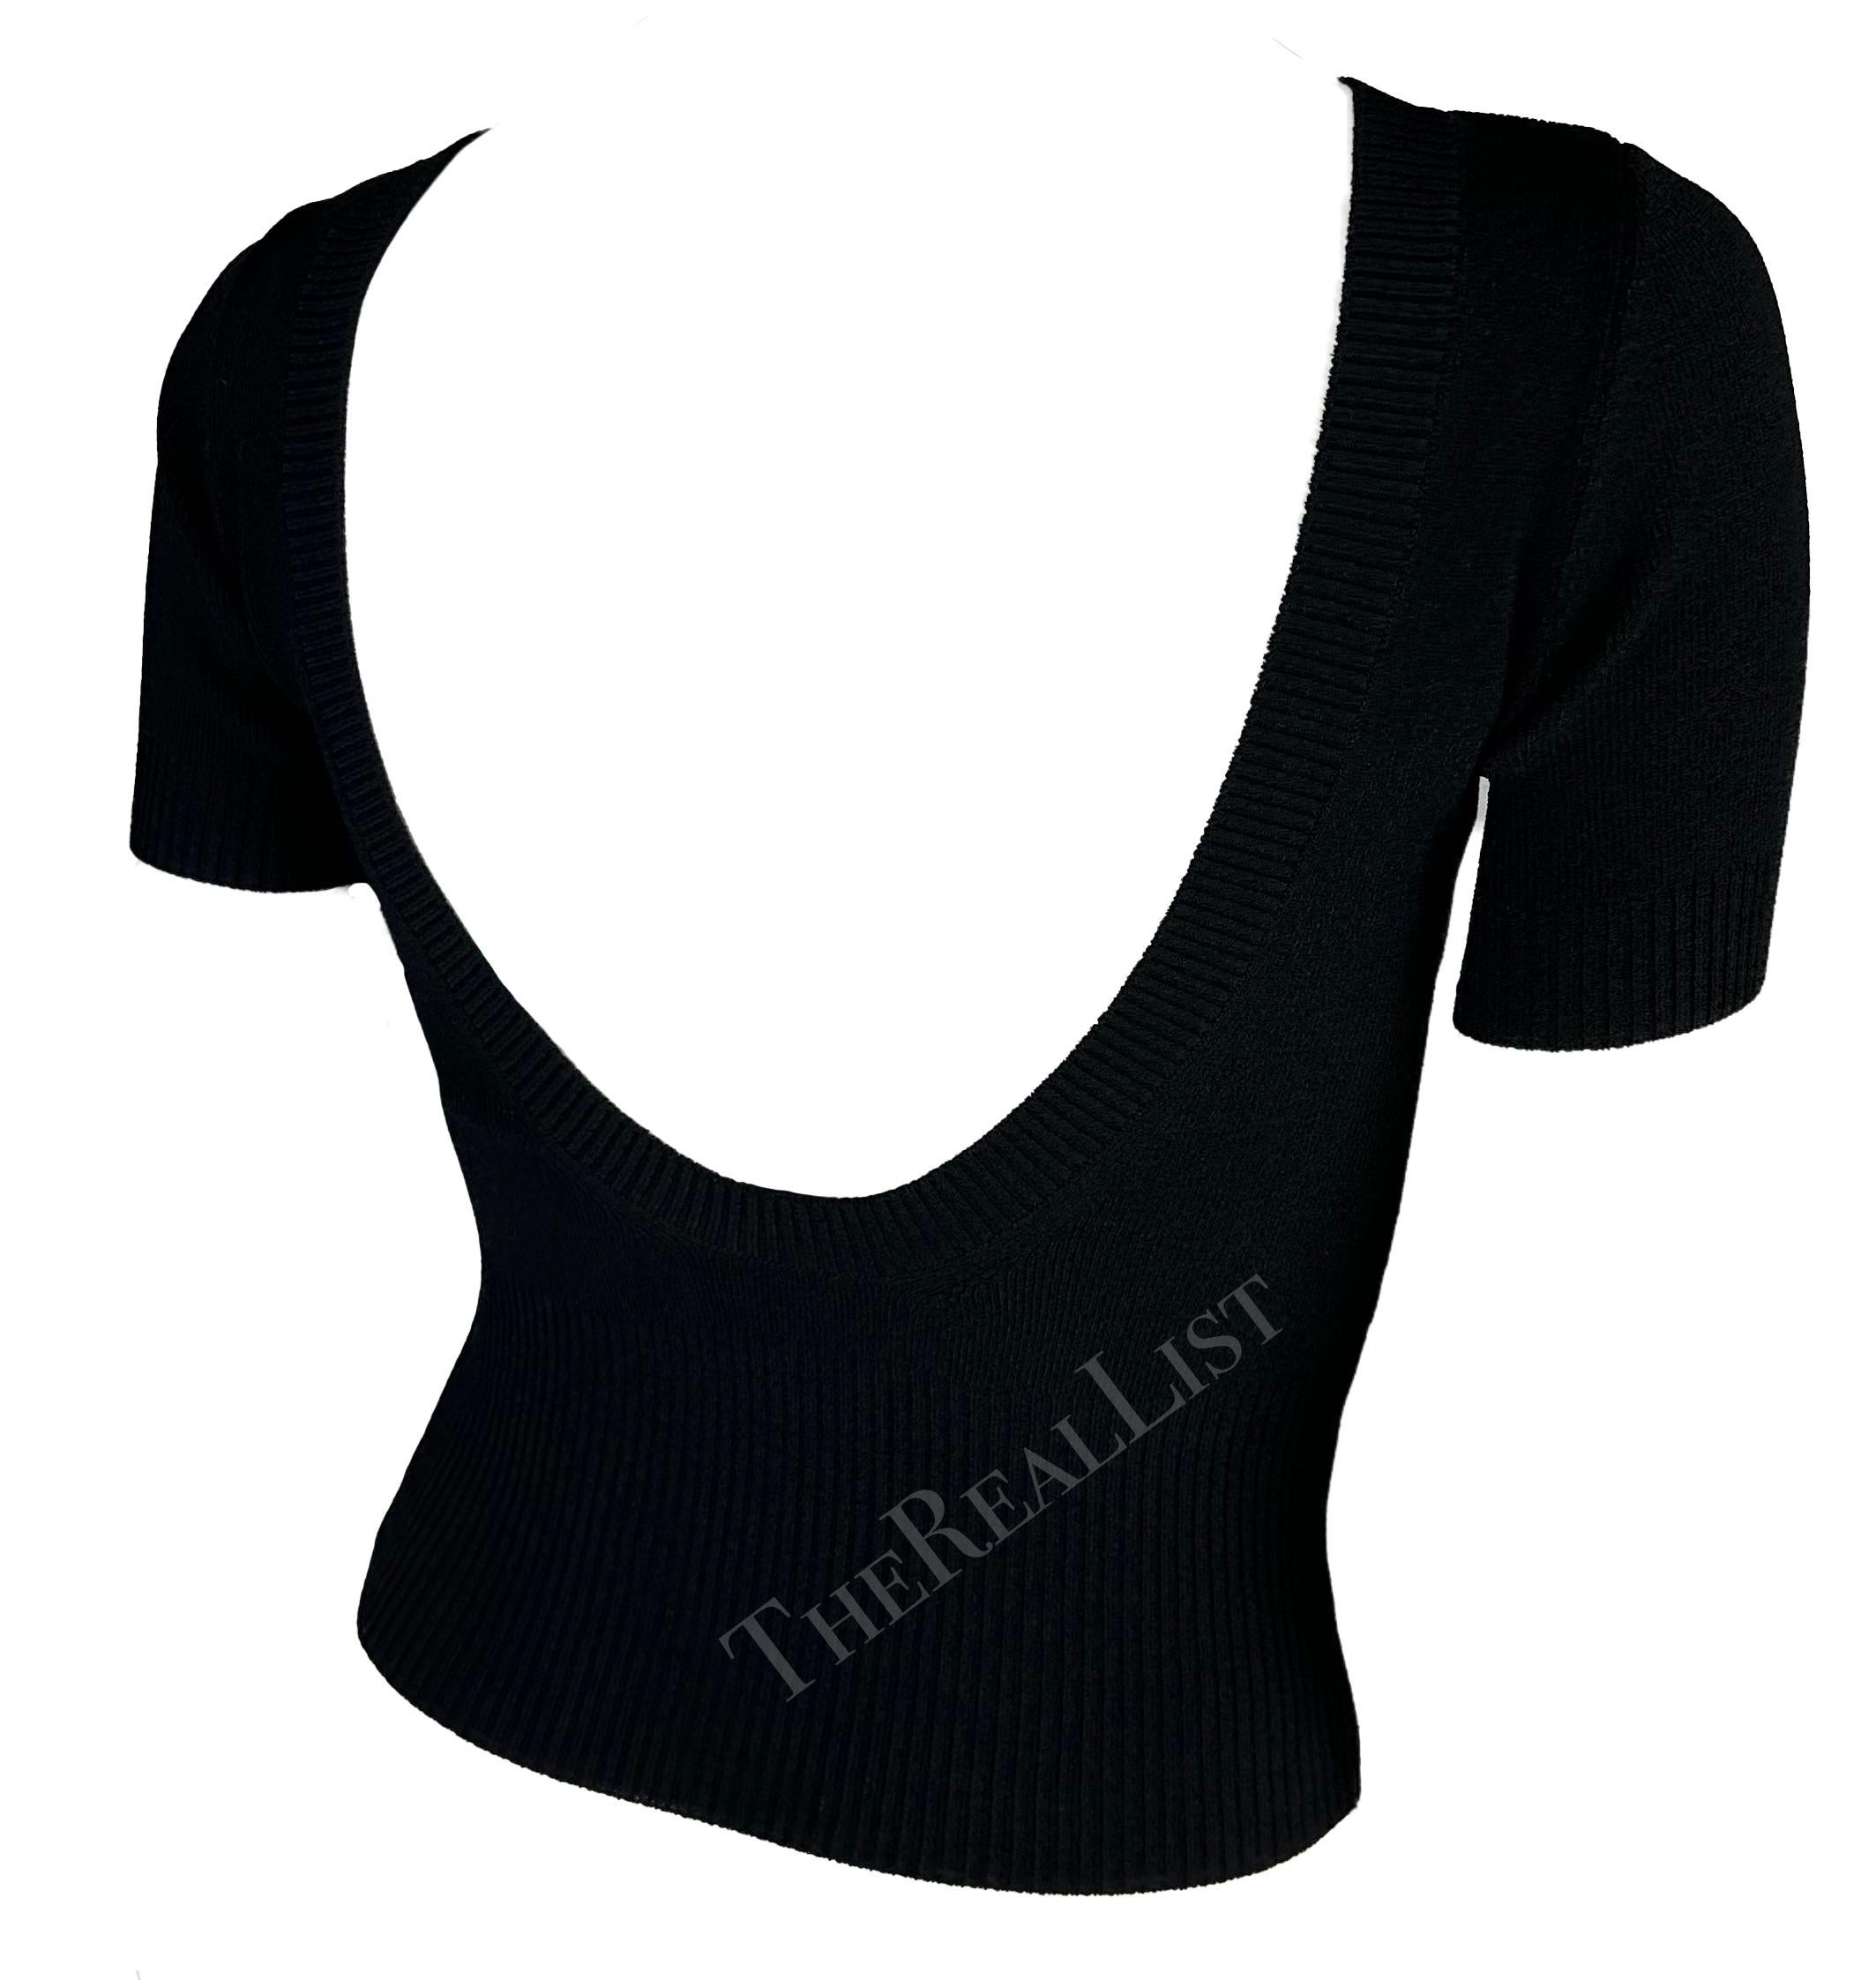 Presenting a chic black knit Dolce & Gabbana short sleeve top. From the late 1990s, this sweater top features a high neckline and is made complete with an exposed back. 

Approximate measurements:
Size - 42IT
Shoulder to hem: 17